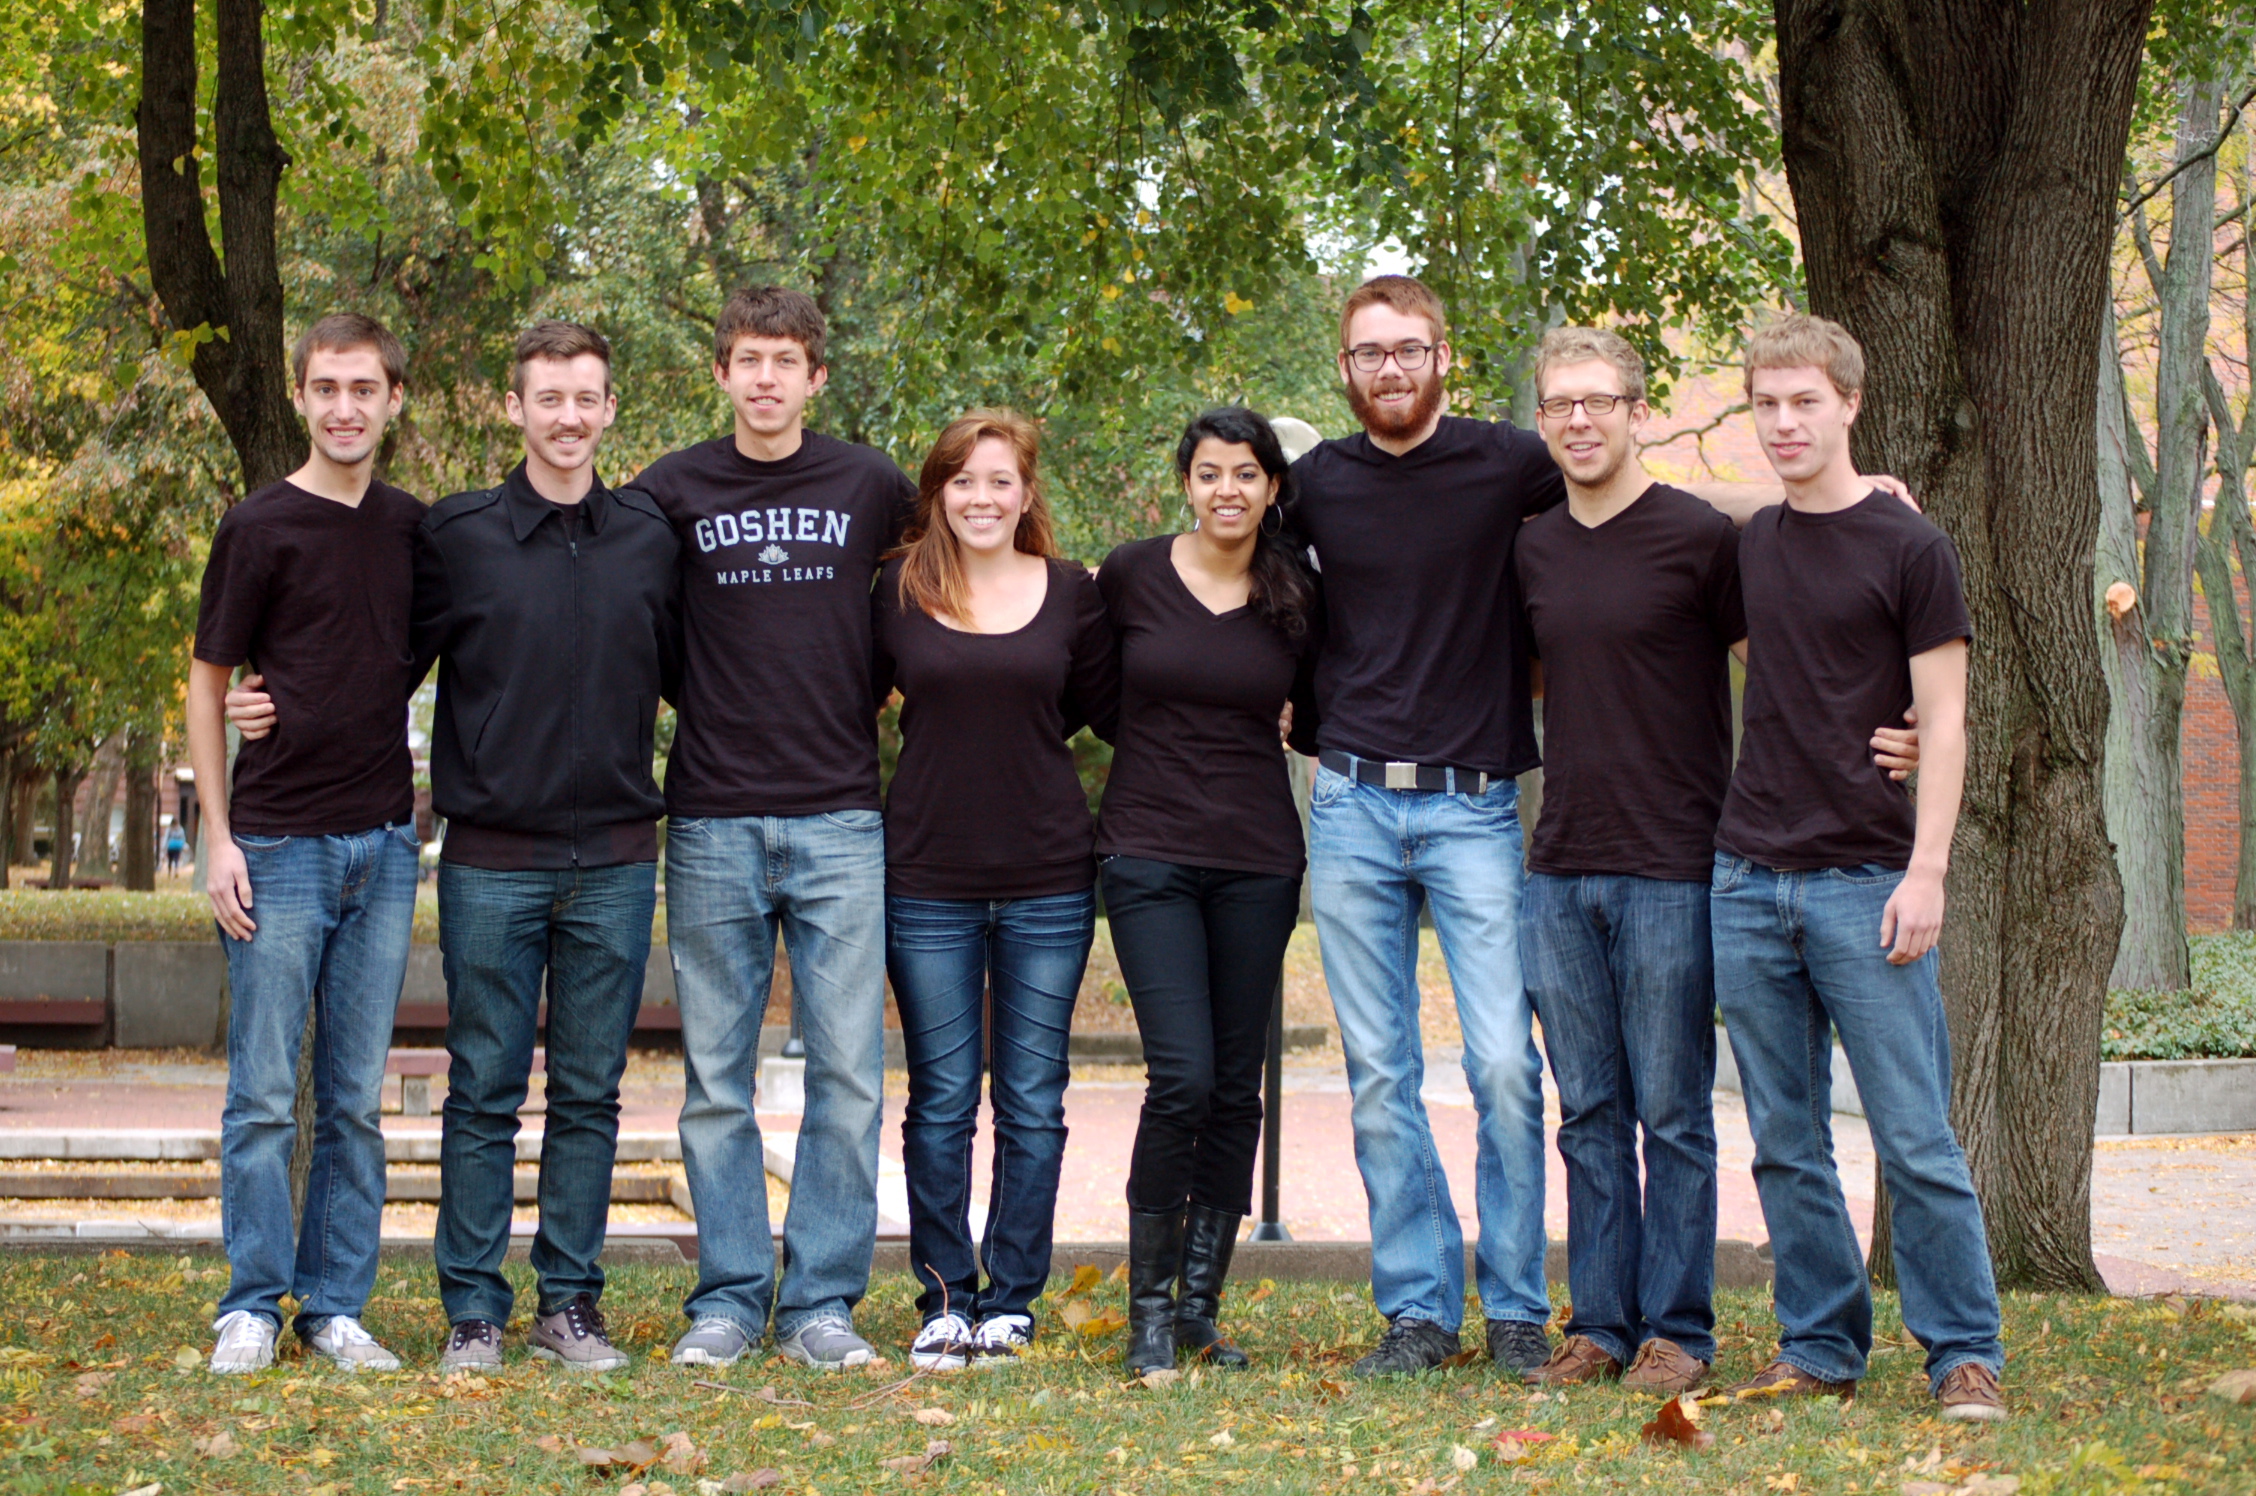 The eight members of Student Senate group together for an outdoors picture